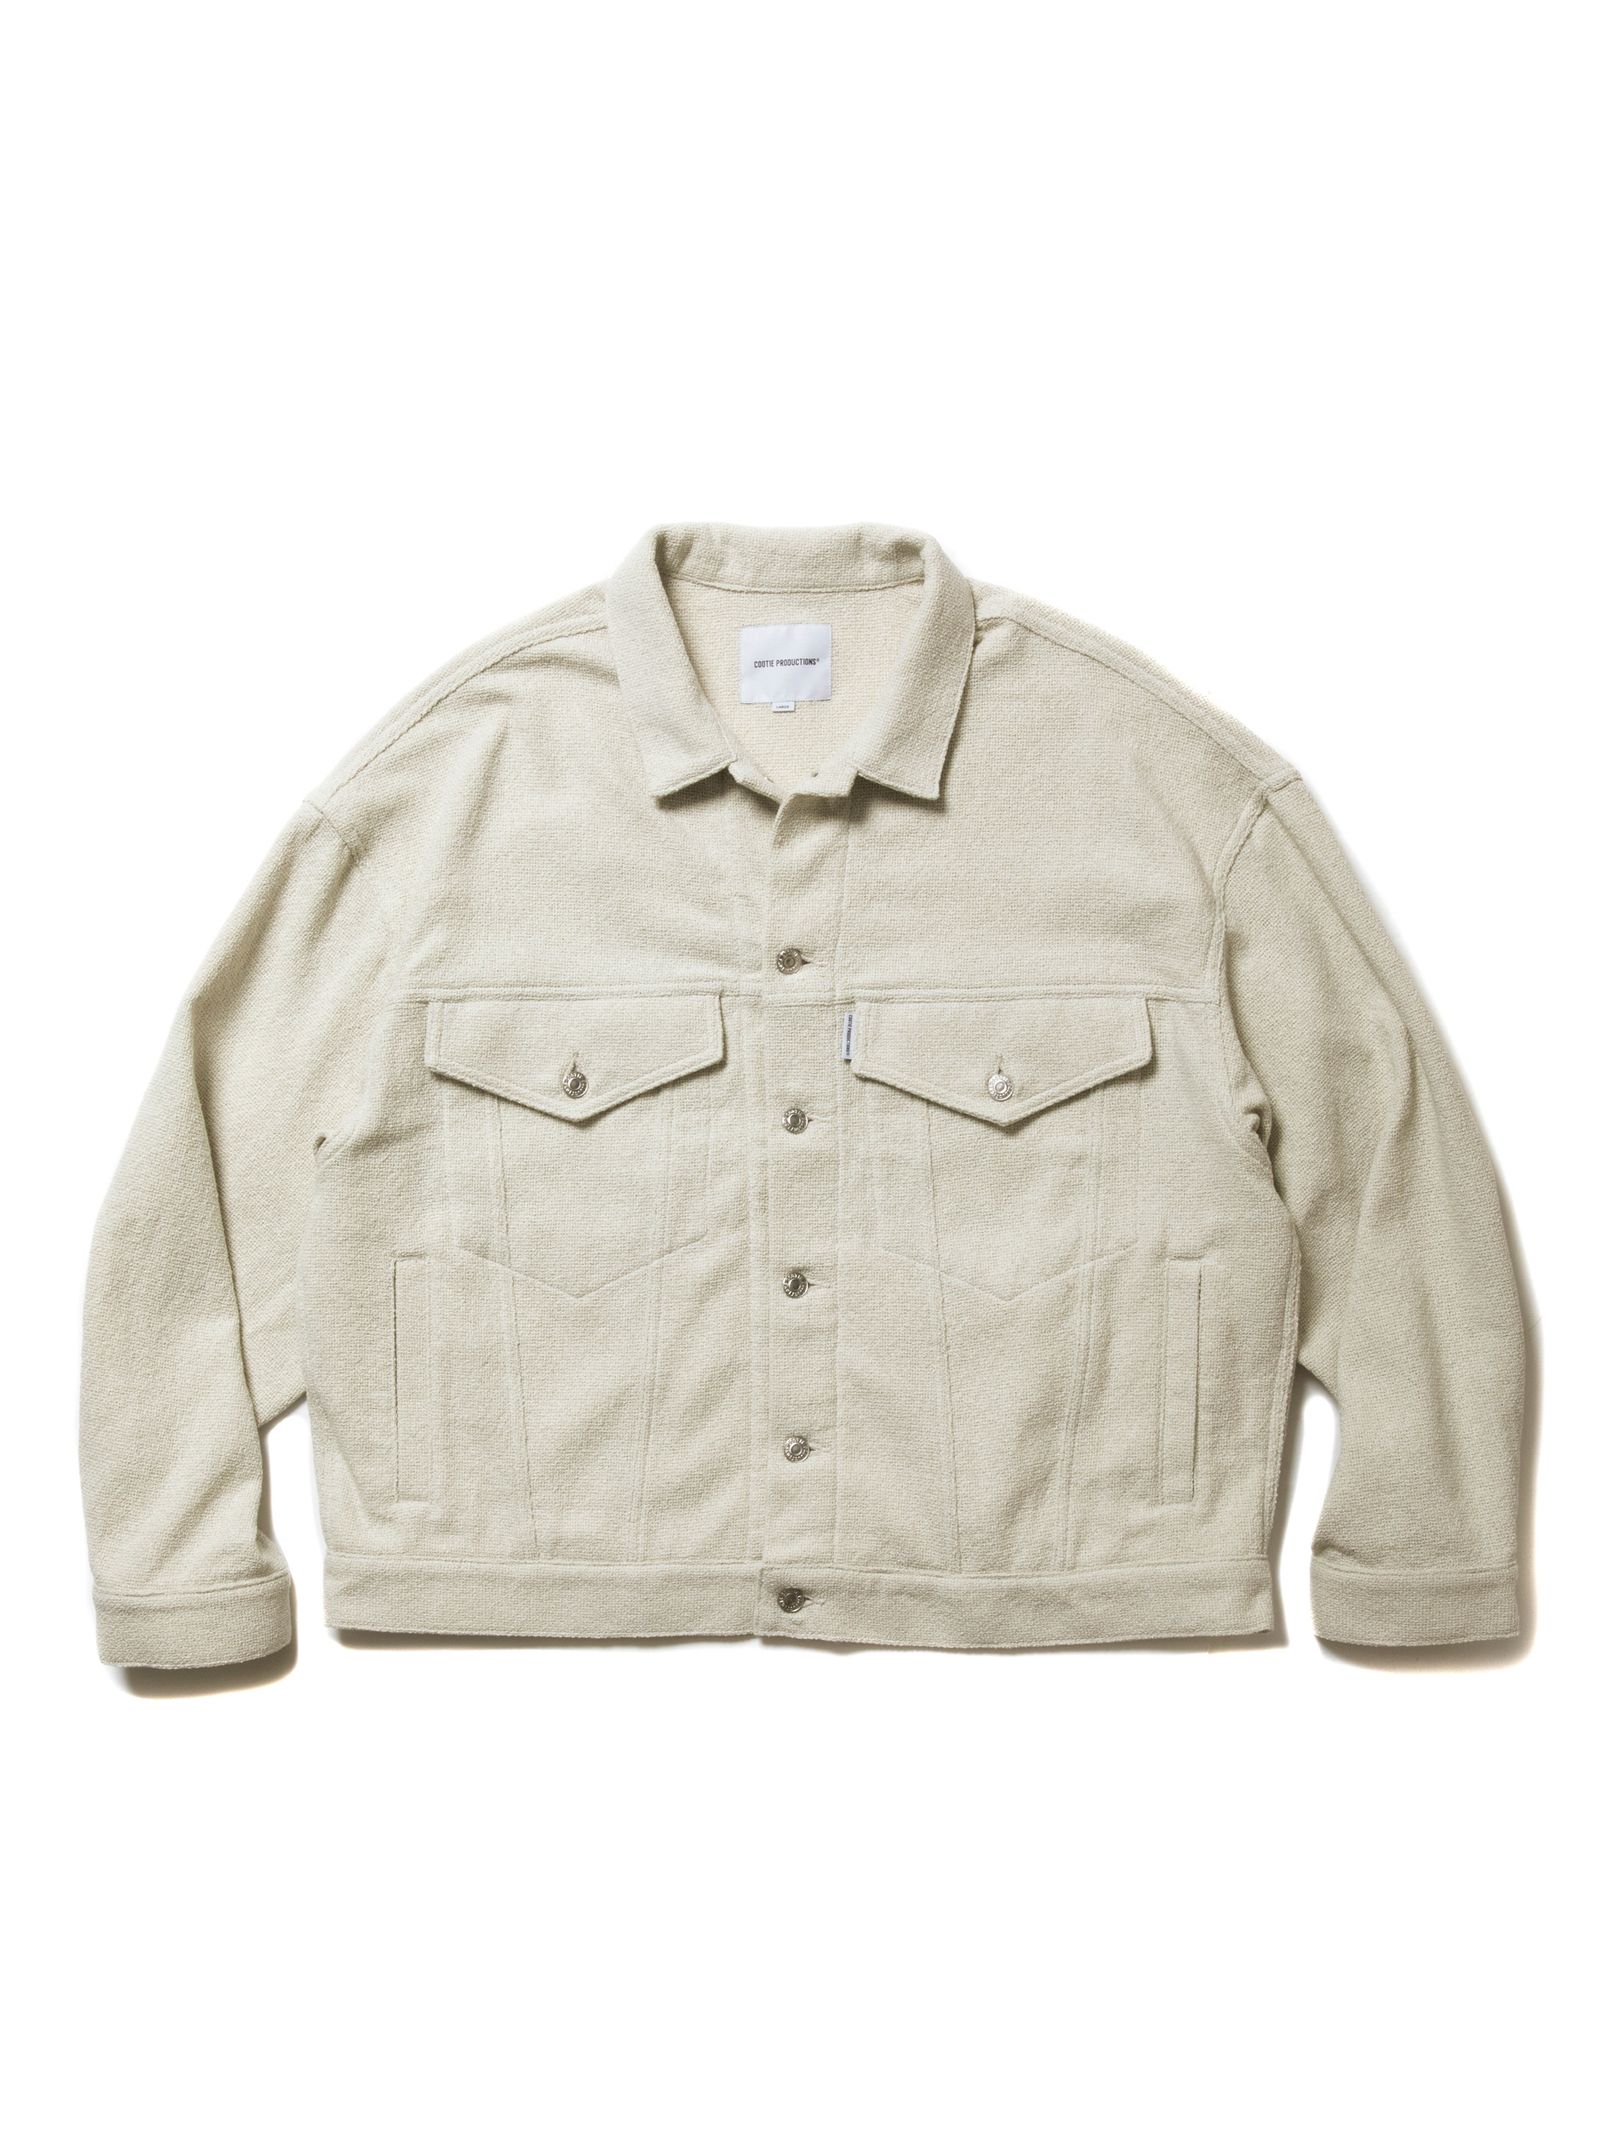 COOTIE PRODUCTIONS - N/C OX 3rd Type Jacket (OFF IVORY) / 3rd 